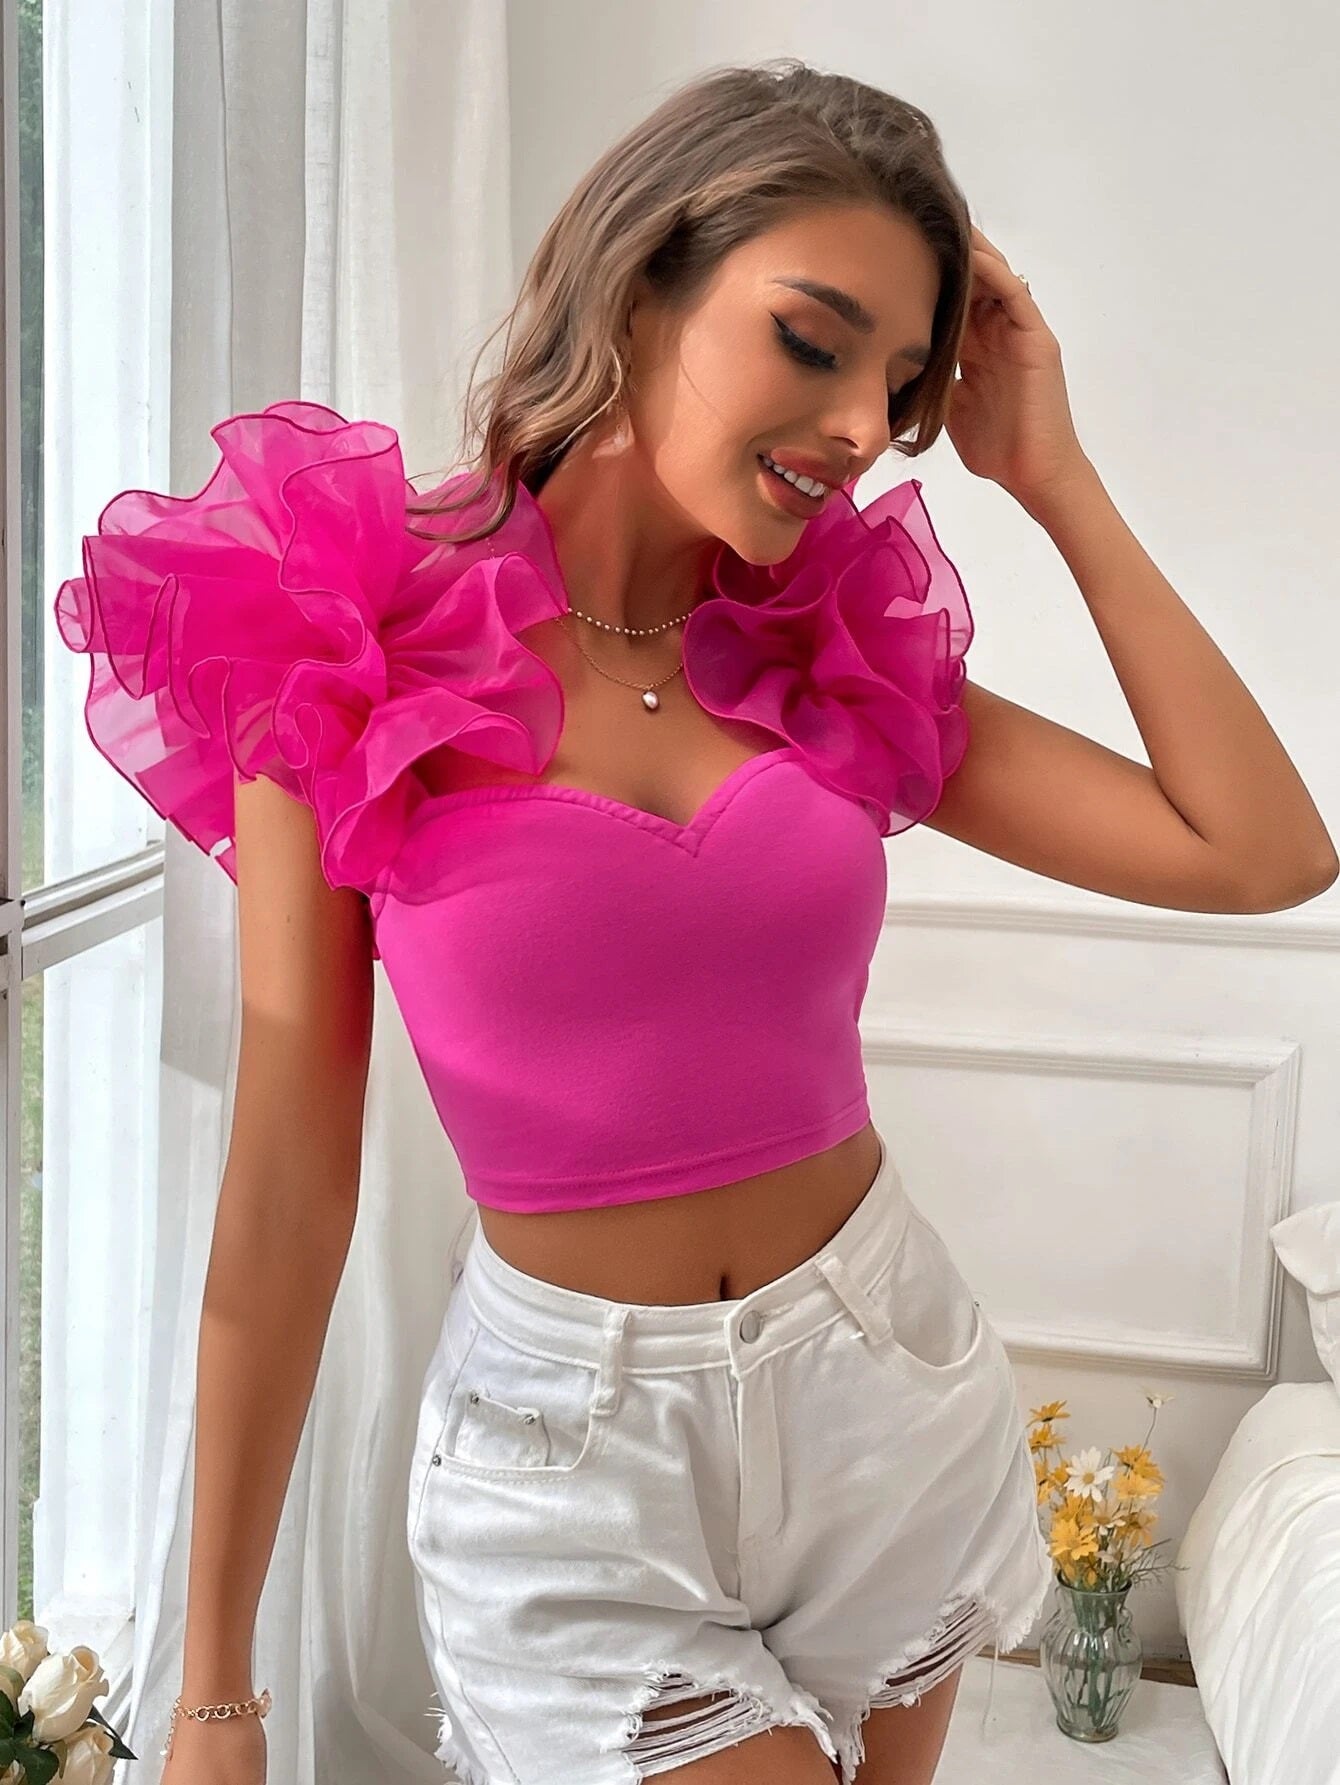 CM-TS806595 Women Casual Seoul Style Exaggerated Ruffle Trim Crop Top - Hot Pink